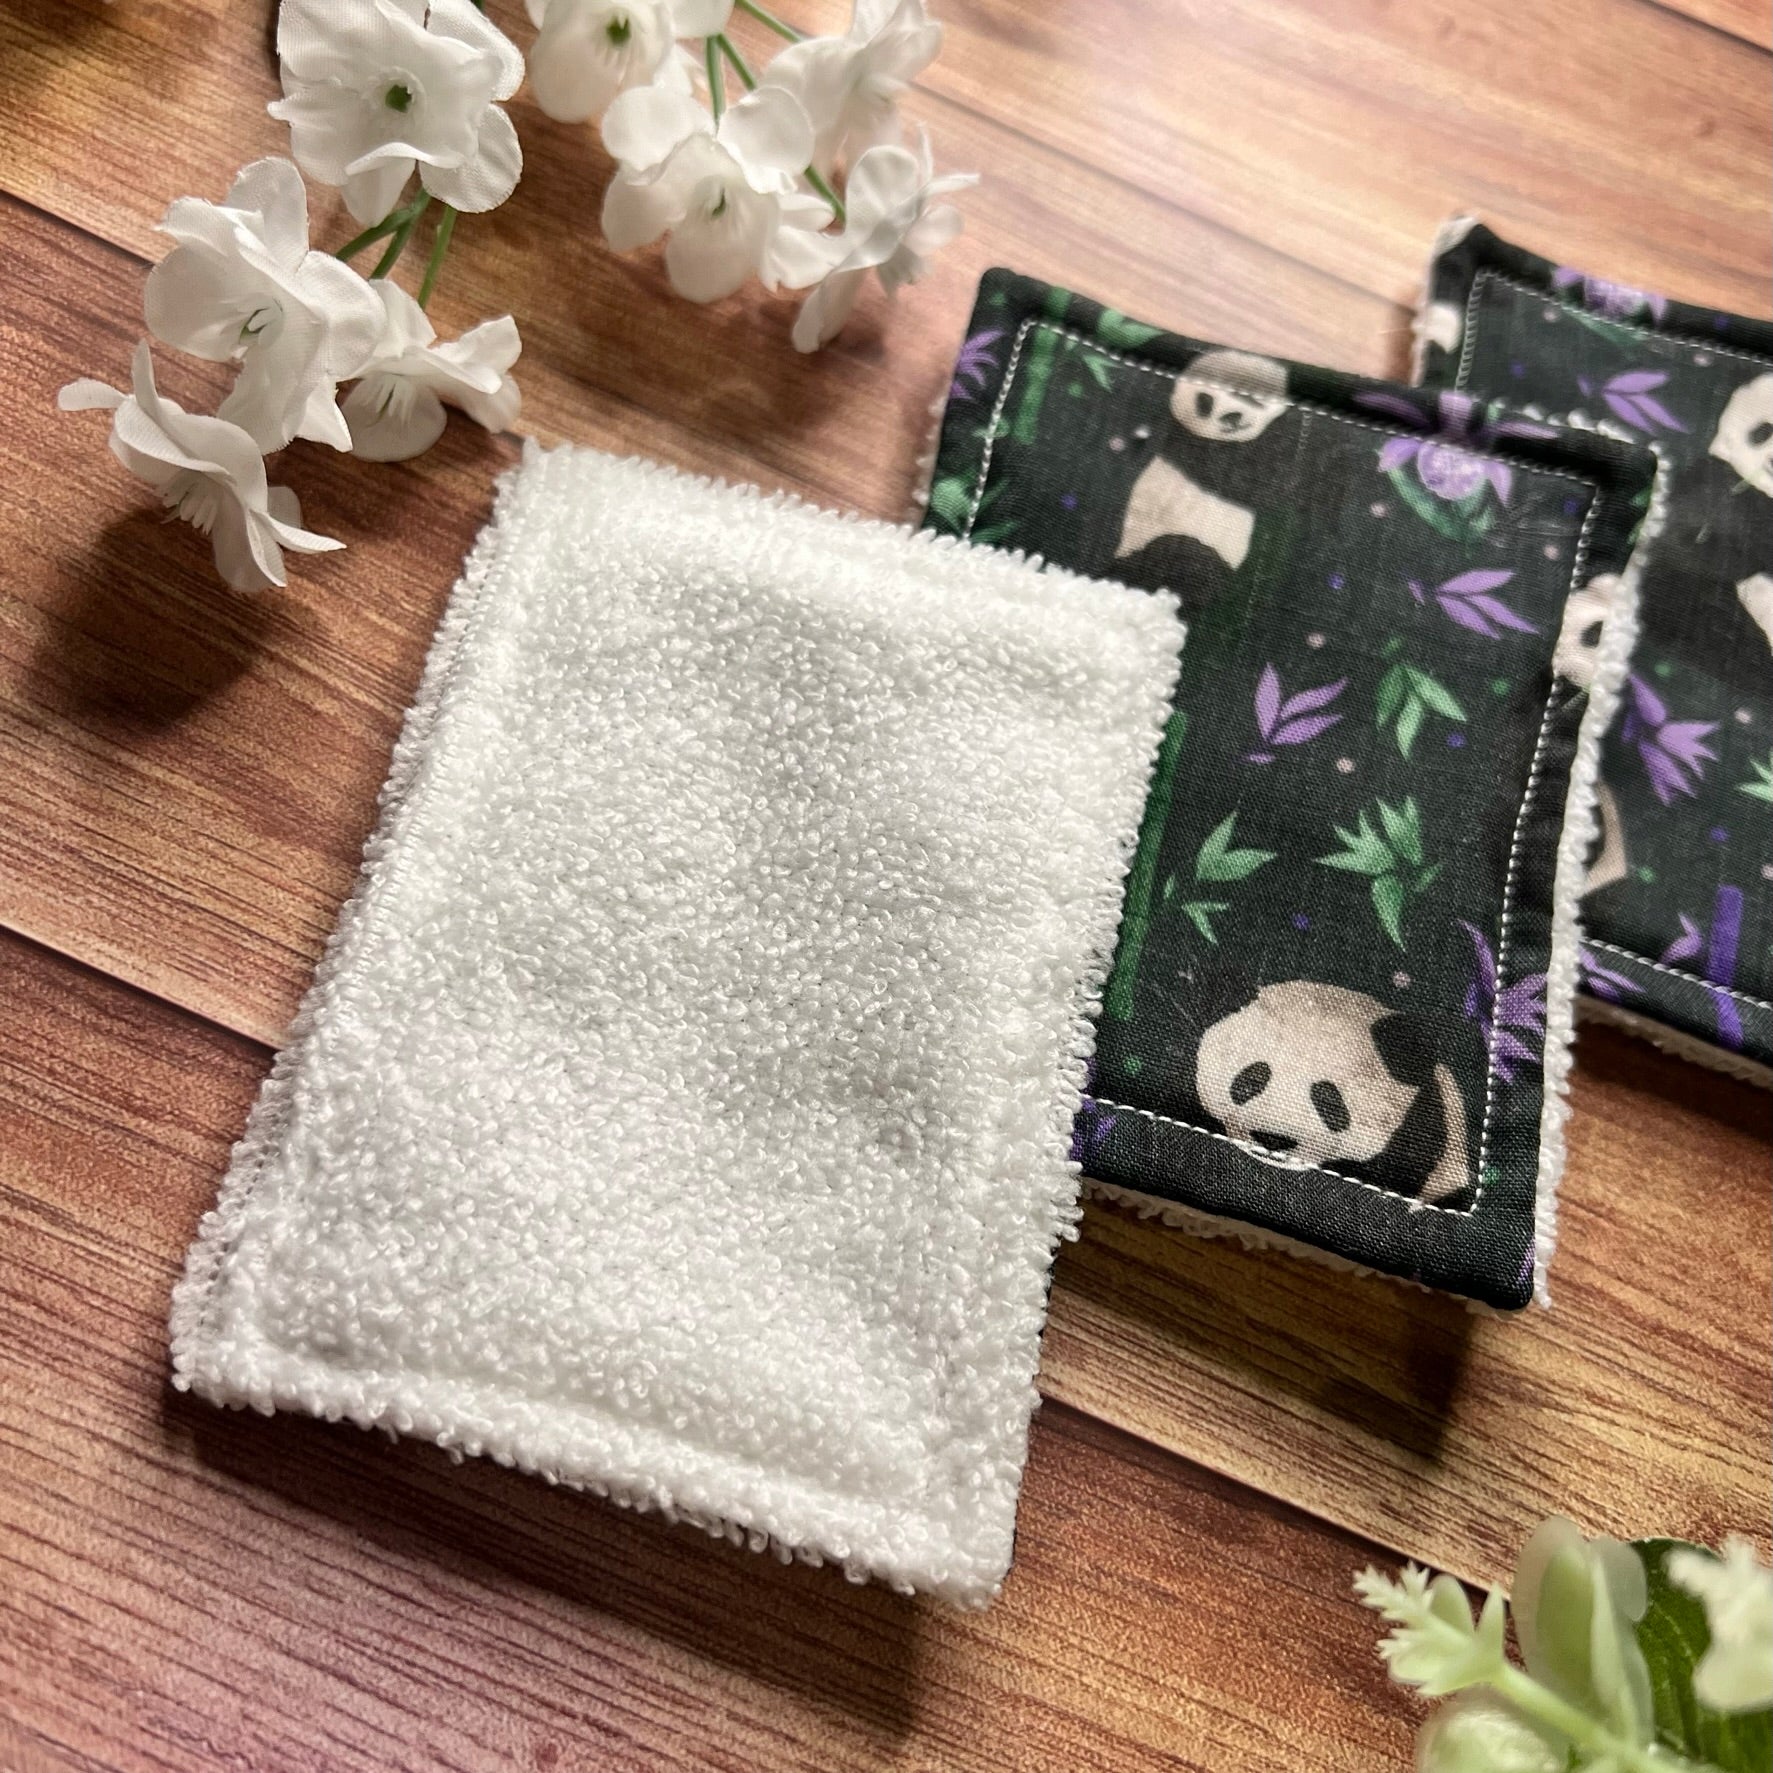 textured towelling for exfoliating on the panda exfoliating face pads, an ideal gift for a girlfriend.